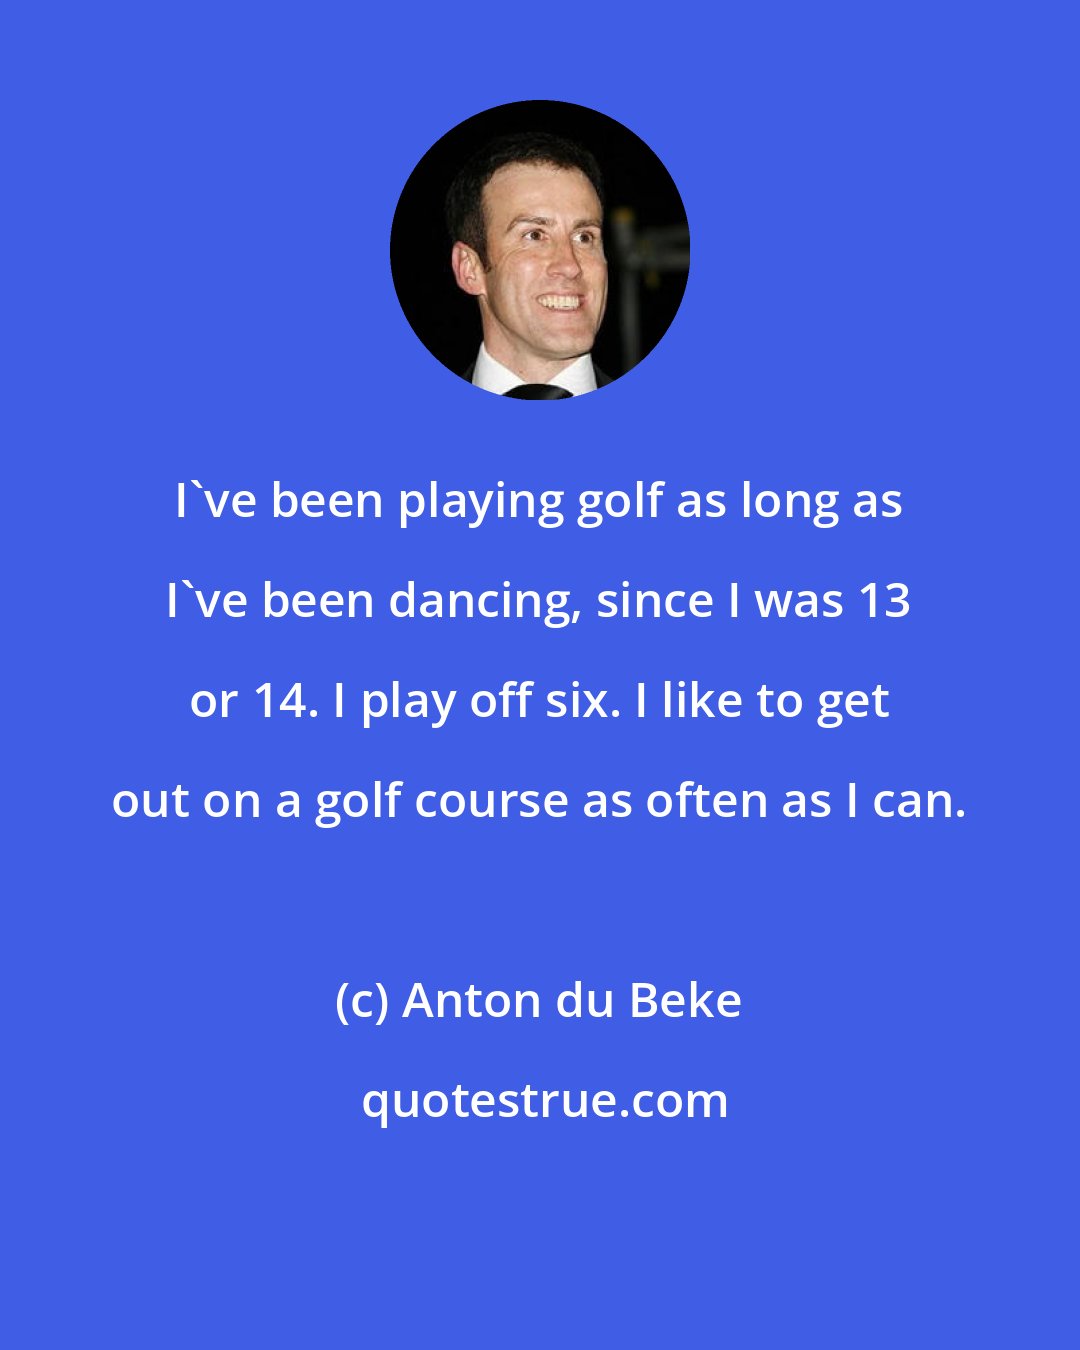 Anton du Beke: I've been playing golf as long as I've been dancing, since I was 13 or 14. I play off six. I like to get out on a golf course as often as I can.